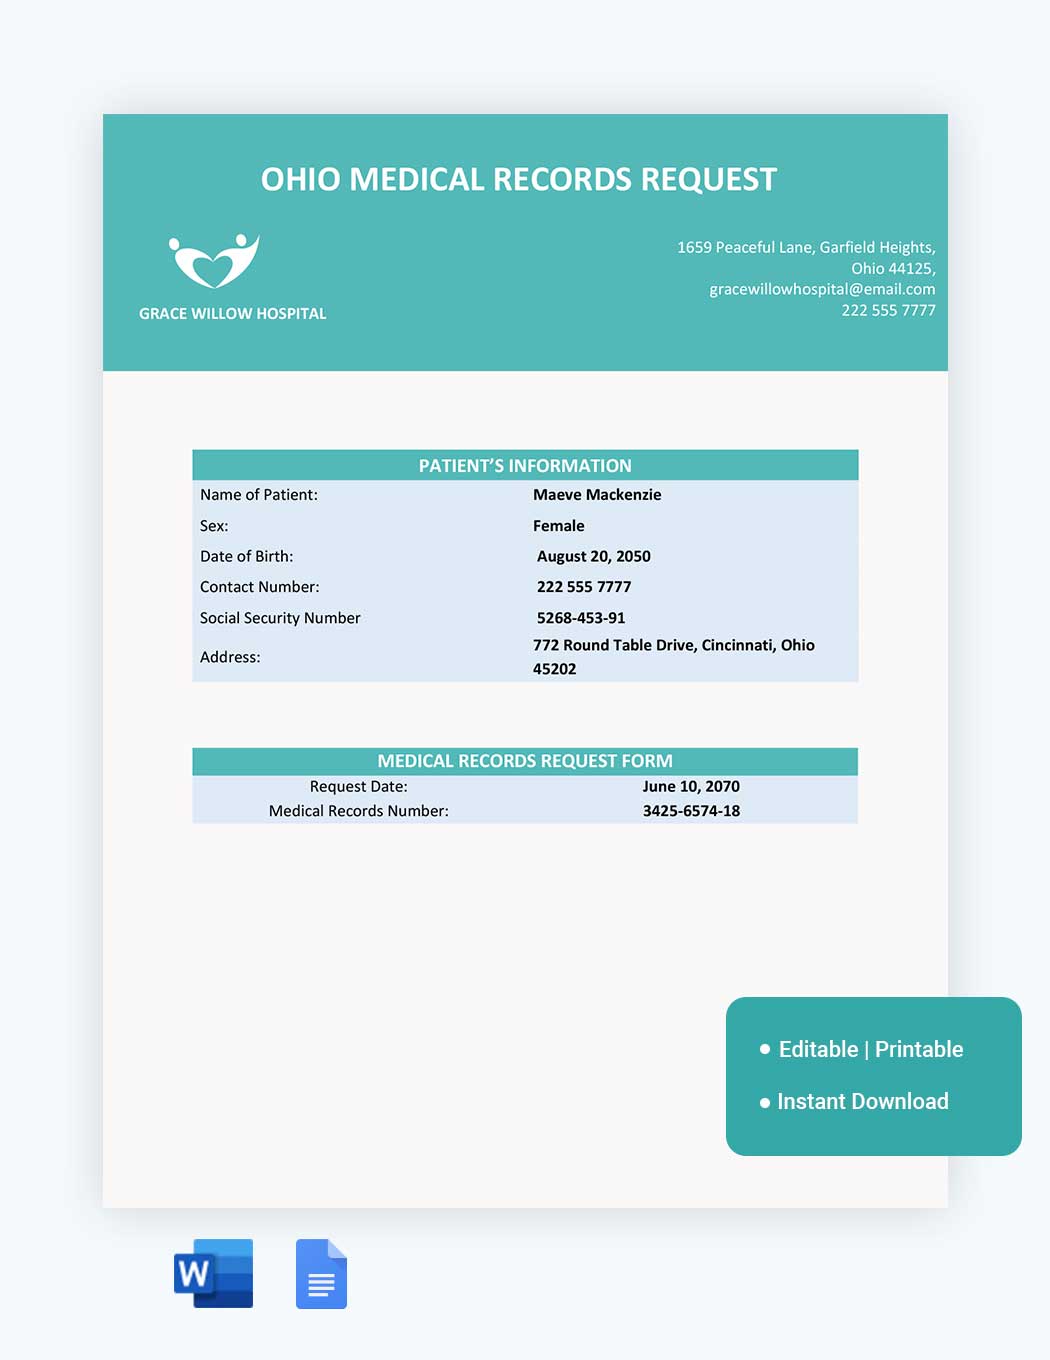 Ohio Medical Records Request Template in Word, Google Docs